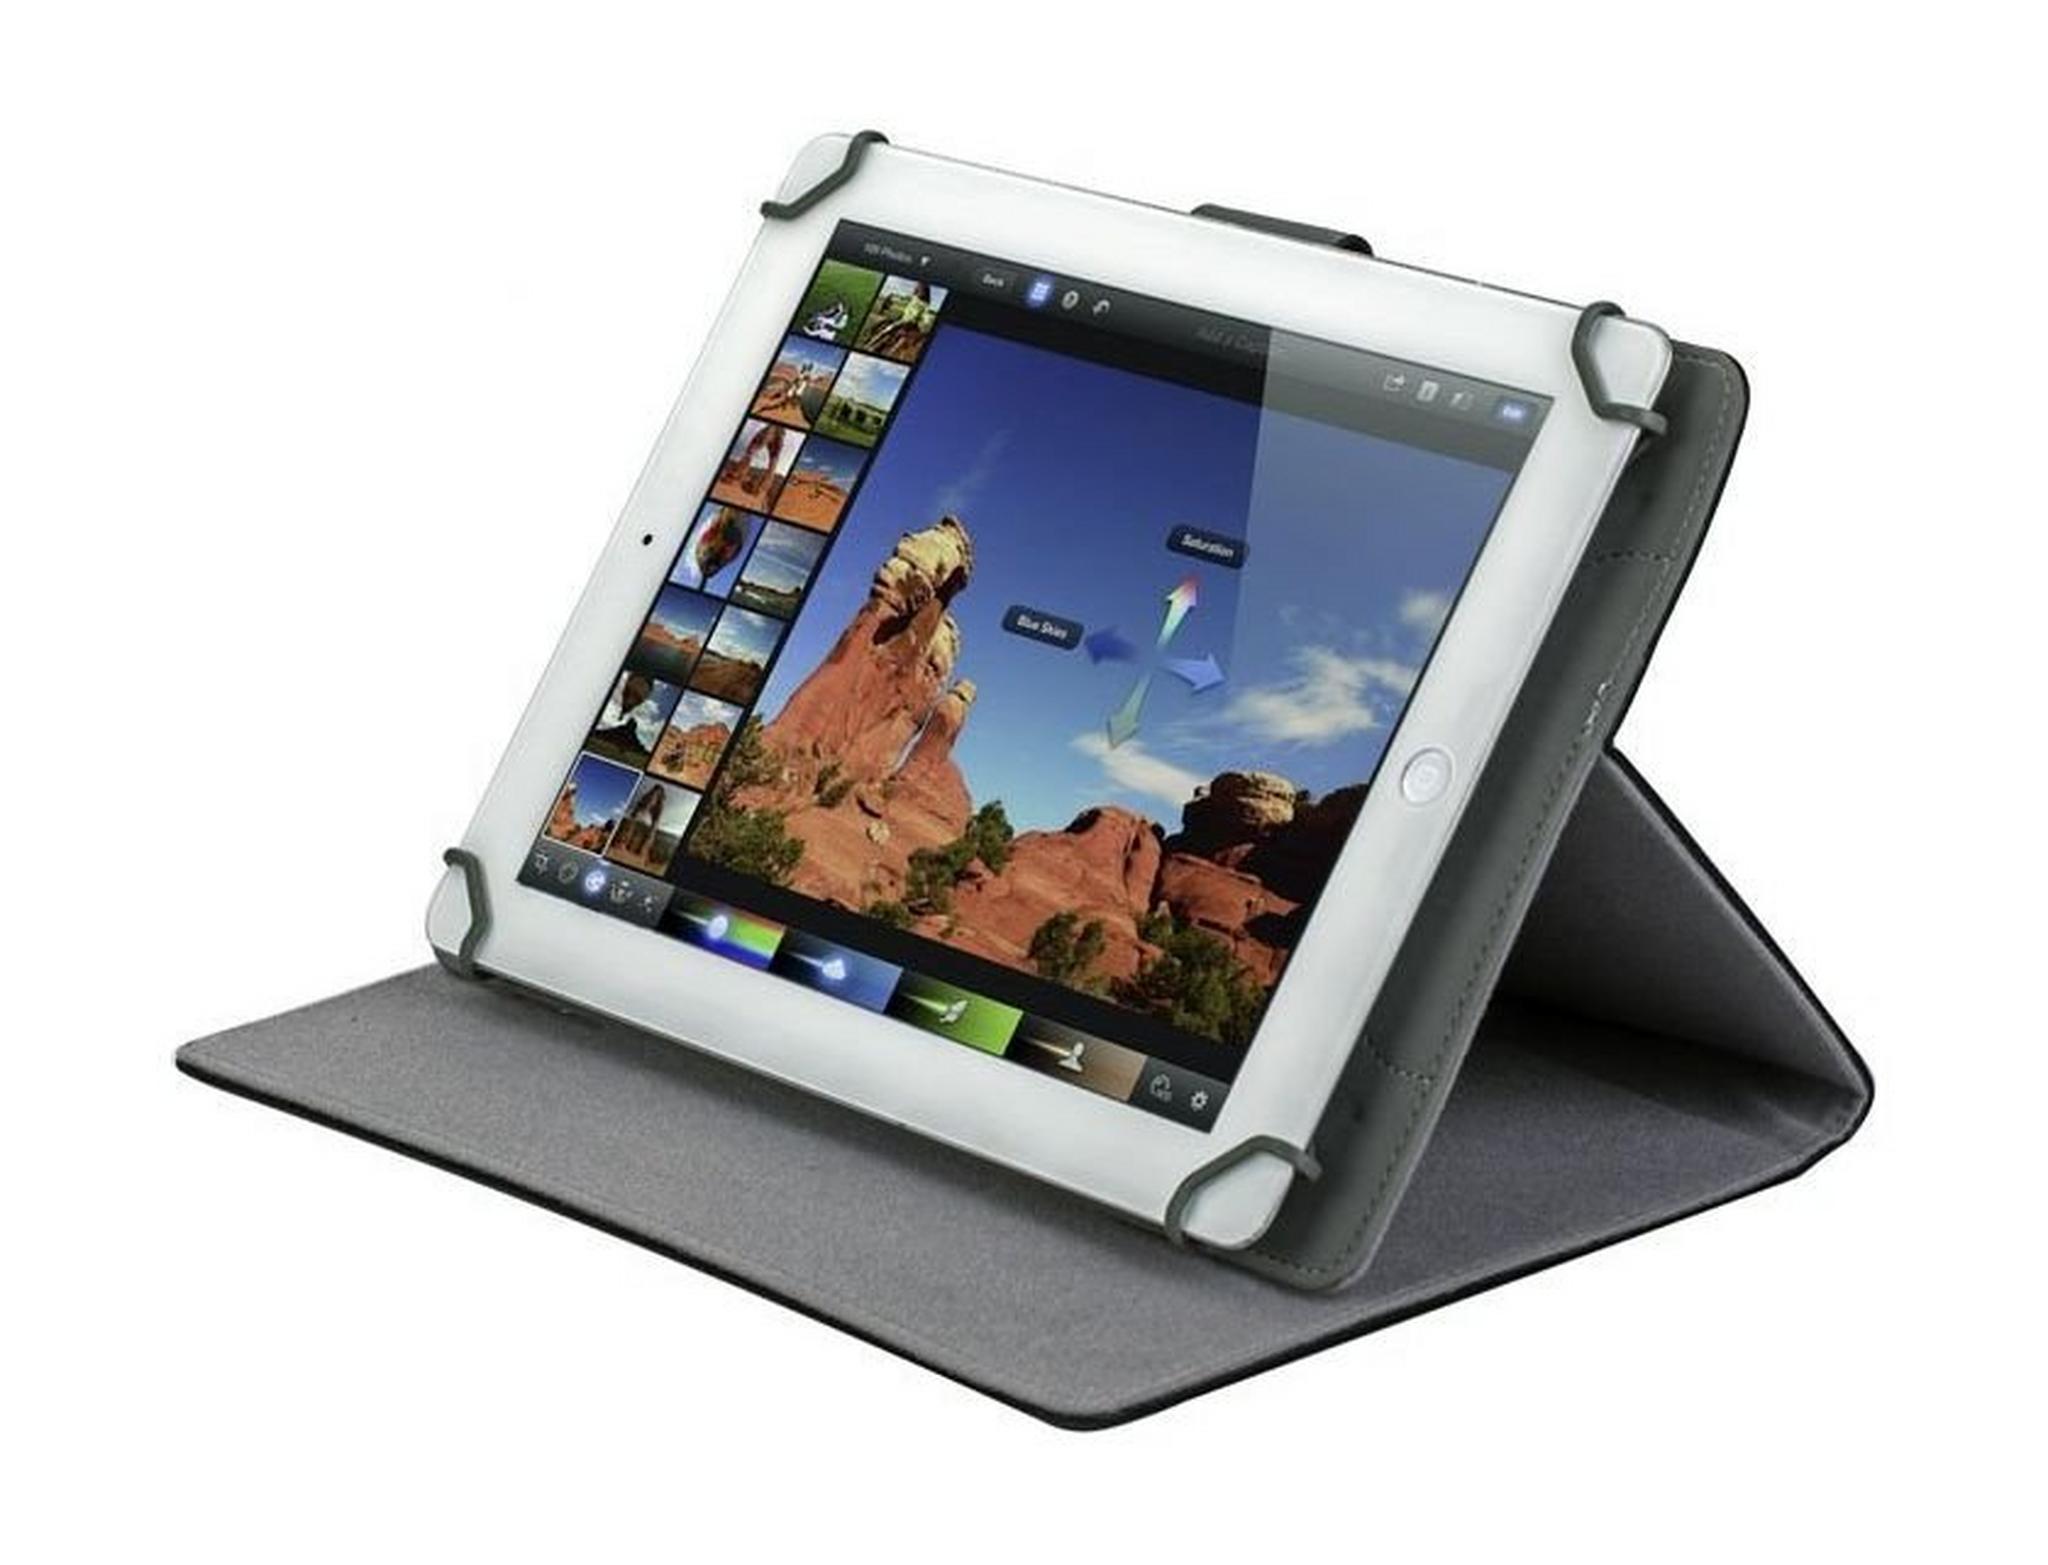 RivaCase Protective Case for 10 inch Tablet, 3017 - Black